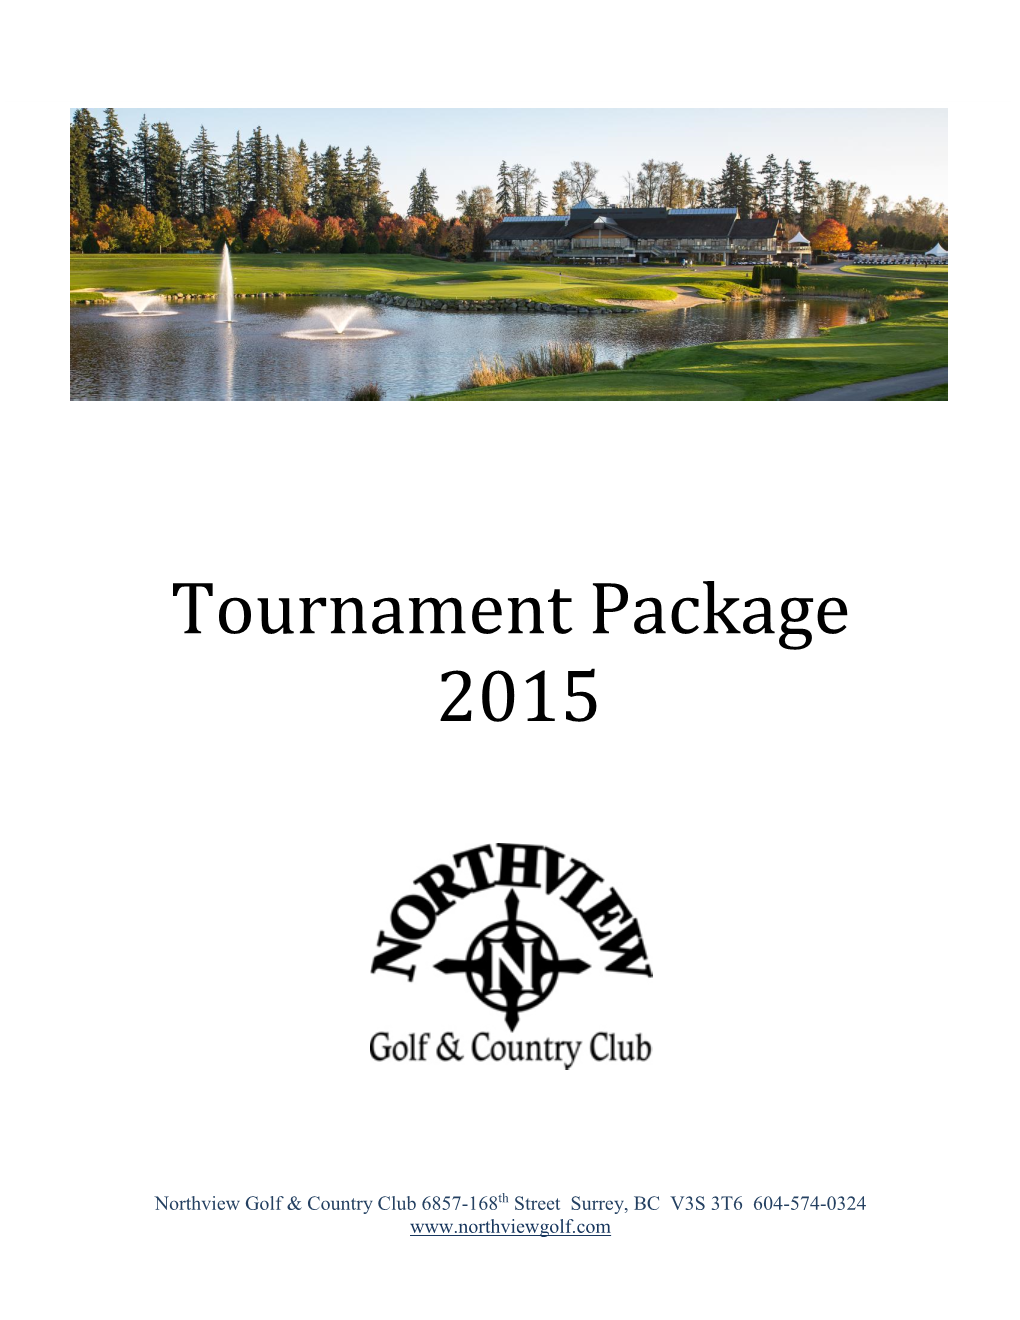 Tournament Package 2015